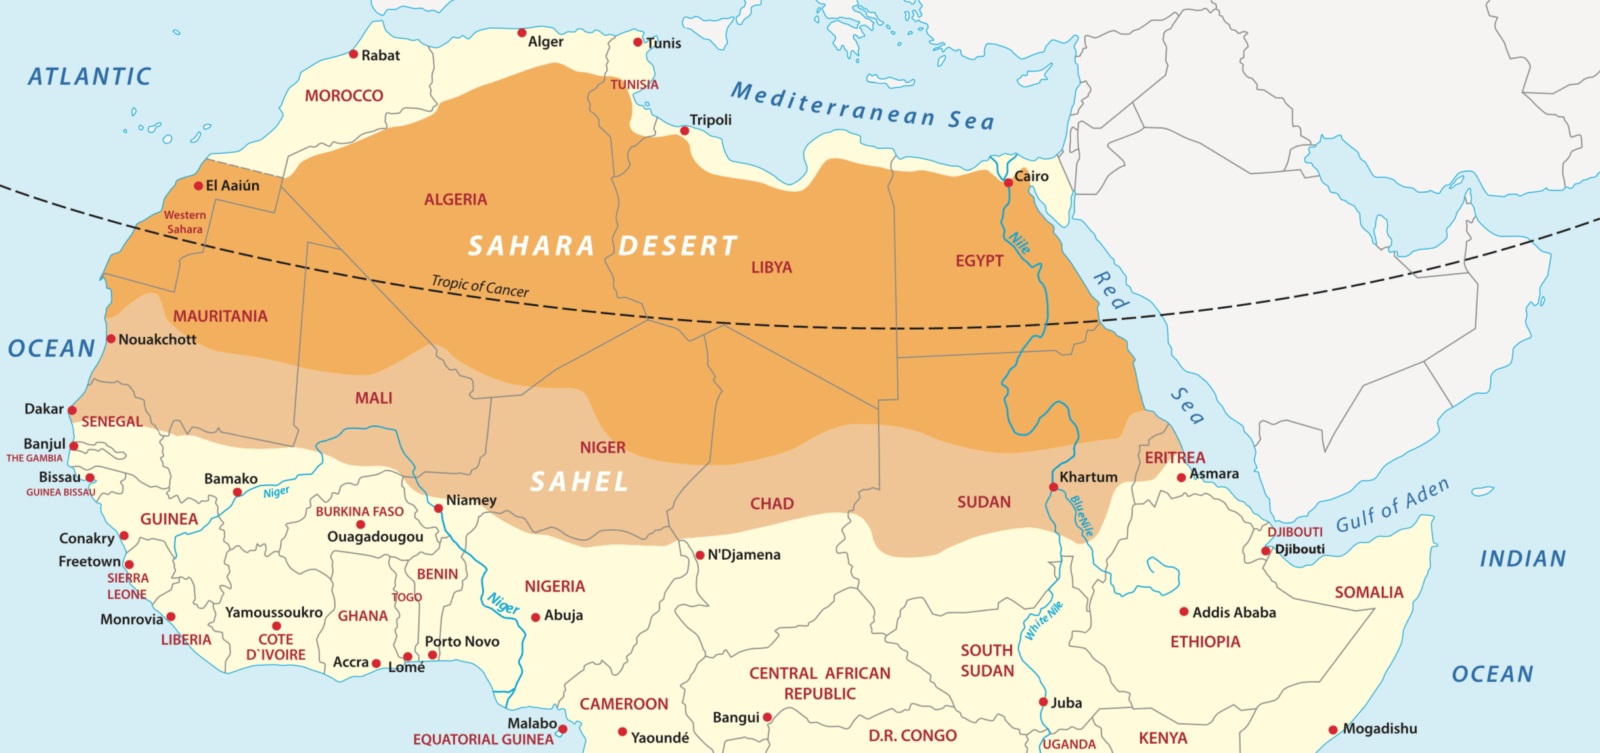 sahara desert location on africa map Opportunities And Challenges In The Sahara Desert Internet Geography sahara desert location on africa map